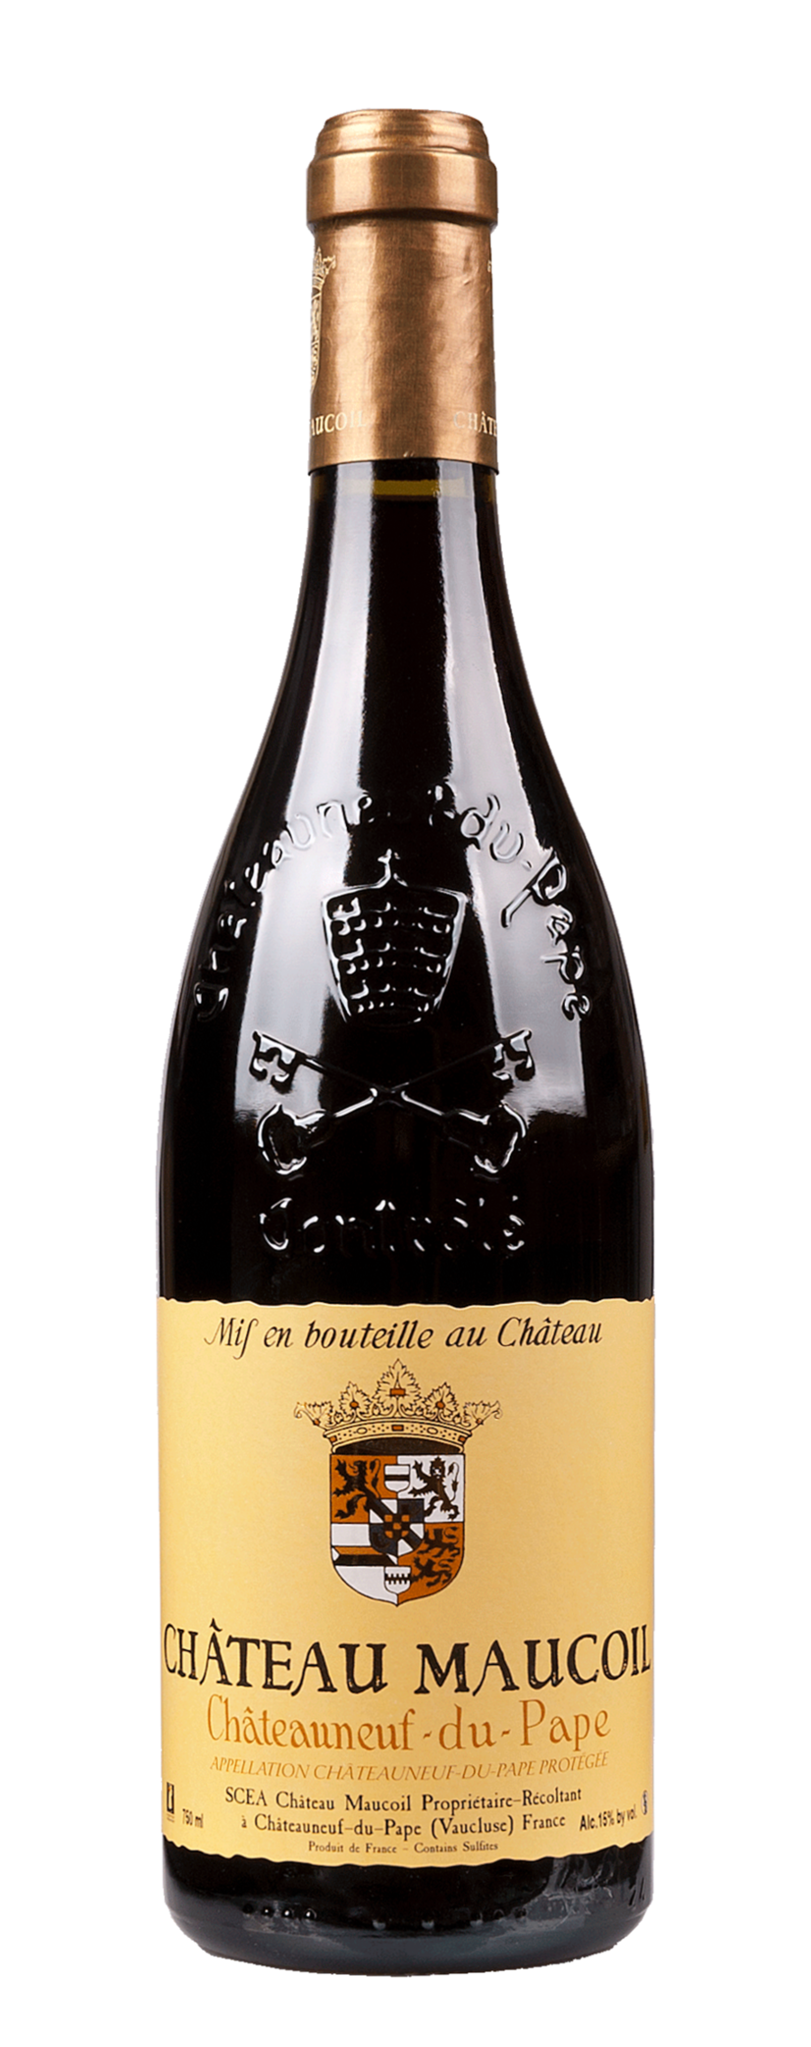 17 Chateauneuf Du Pape Tradition Chateau Maucoil 27 95 Maluni Wines